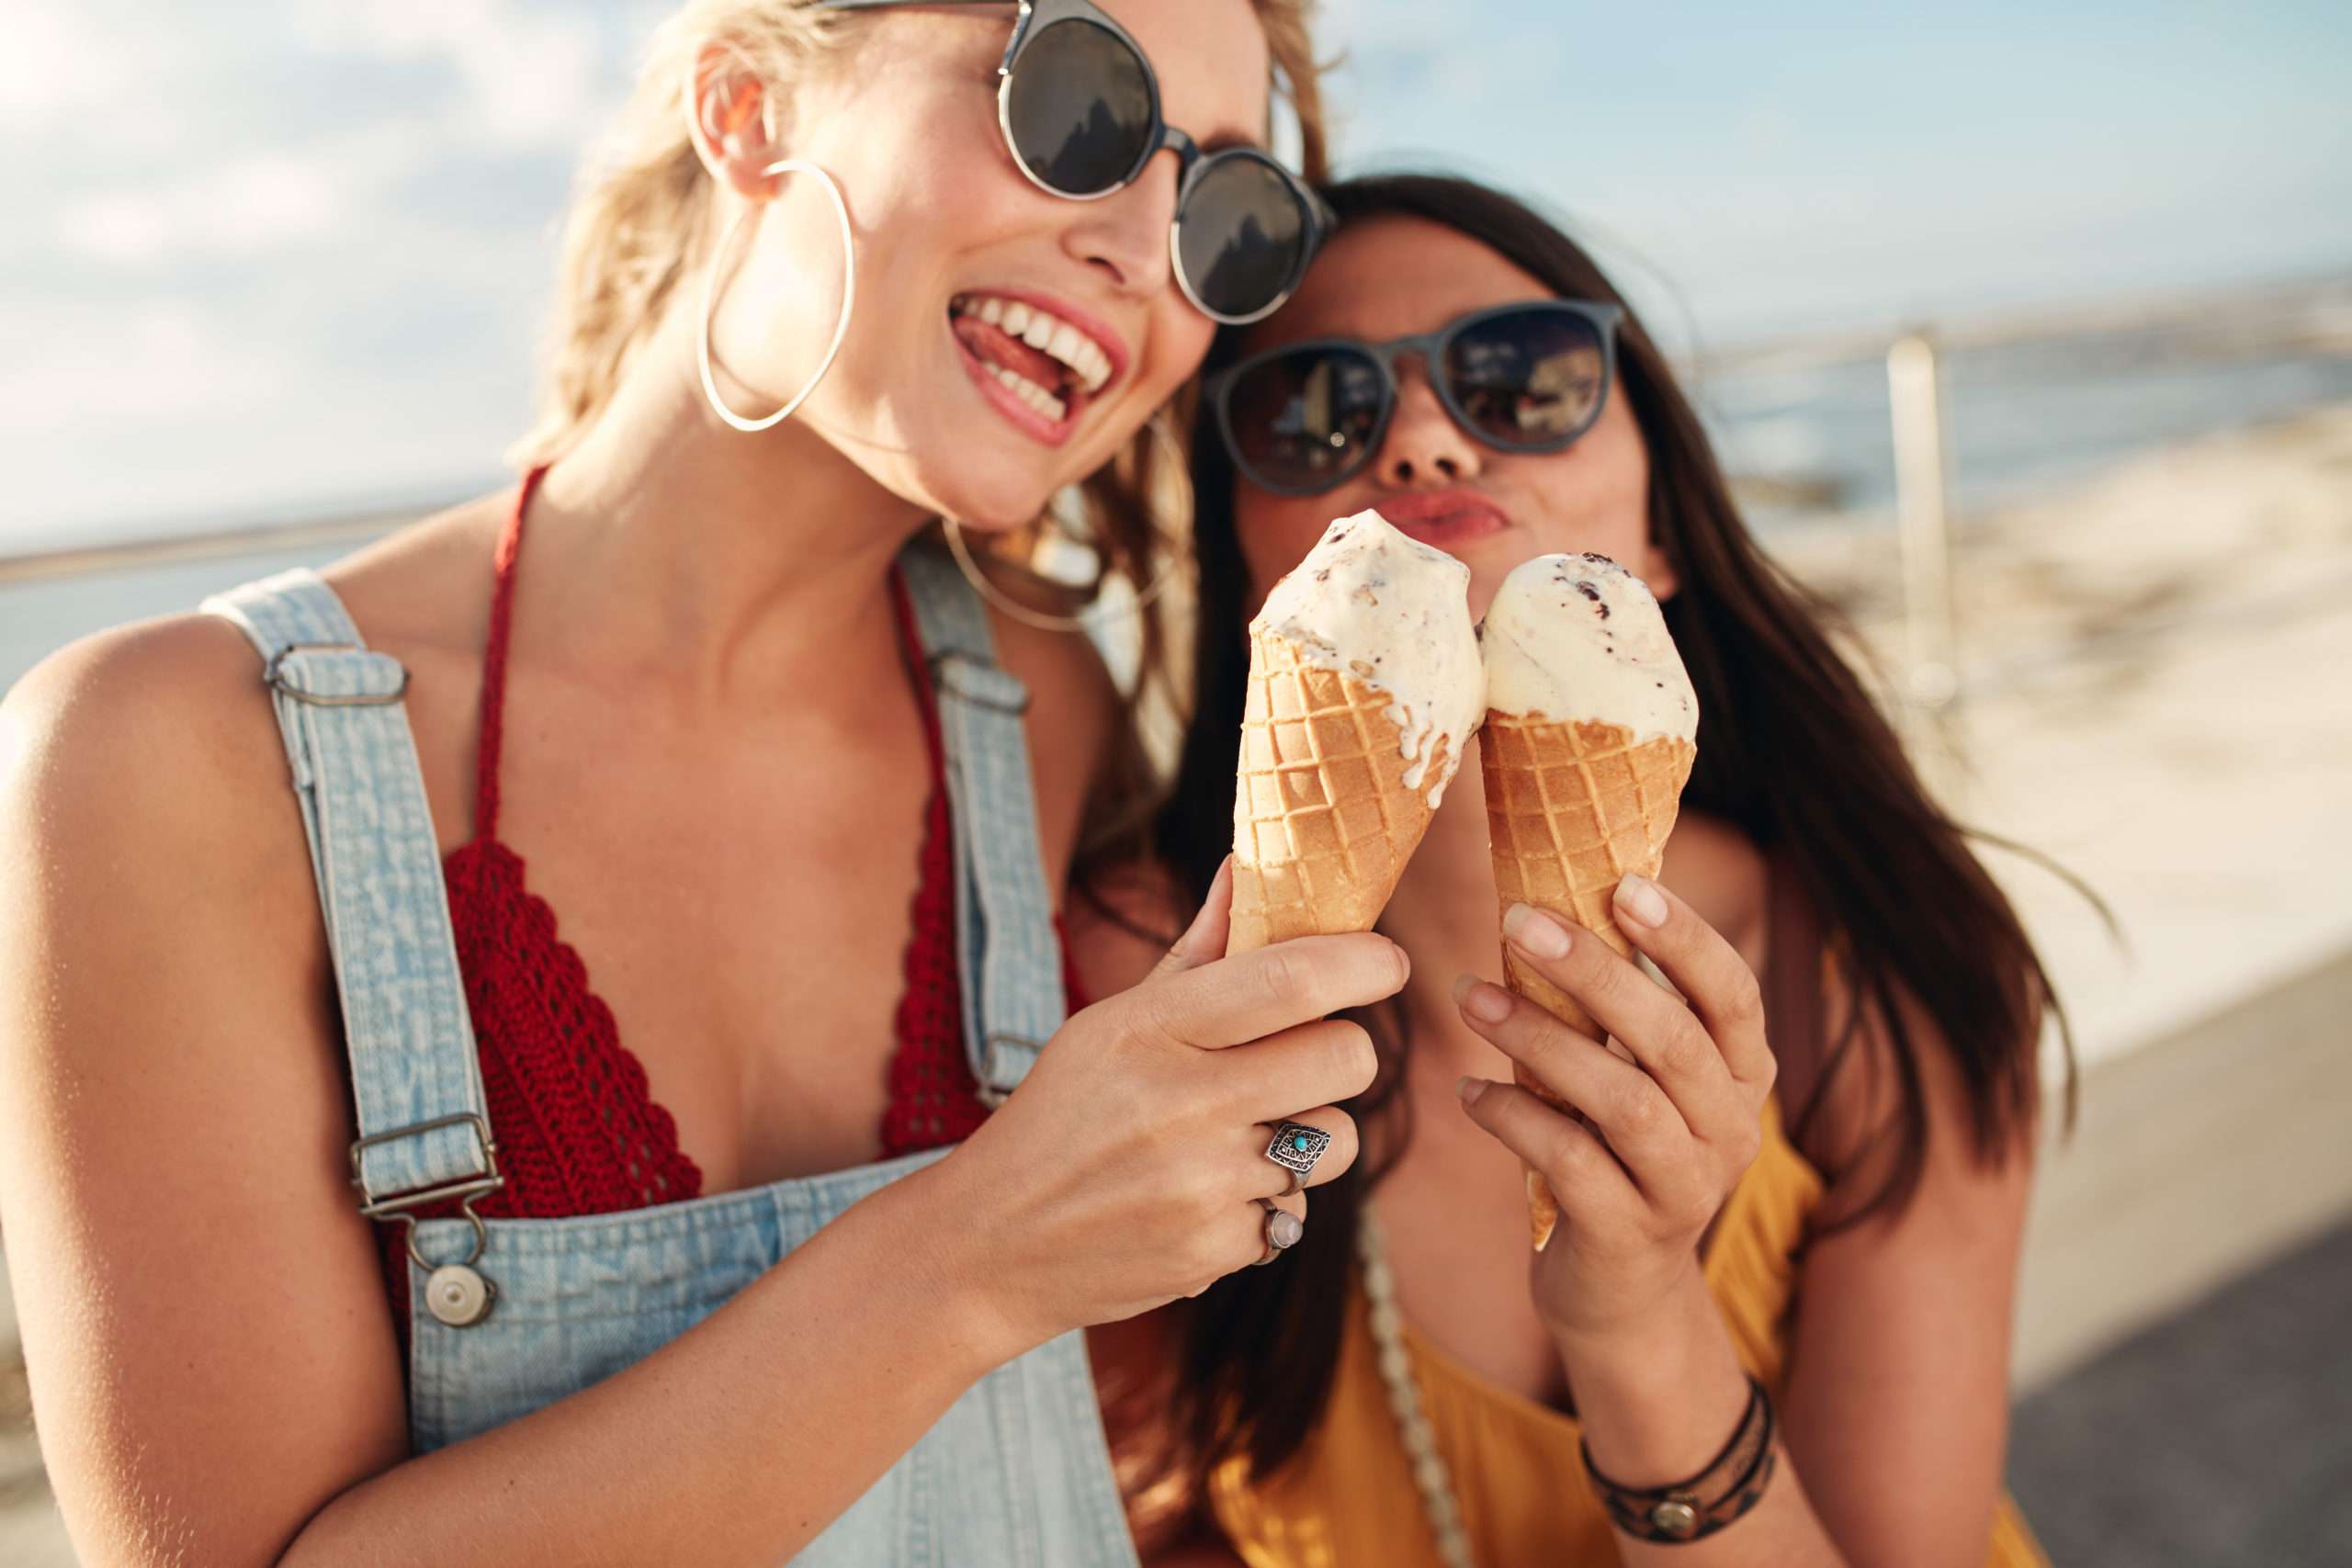 Two young women eating an ice cream together